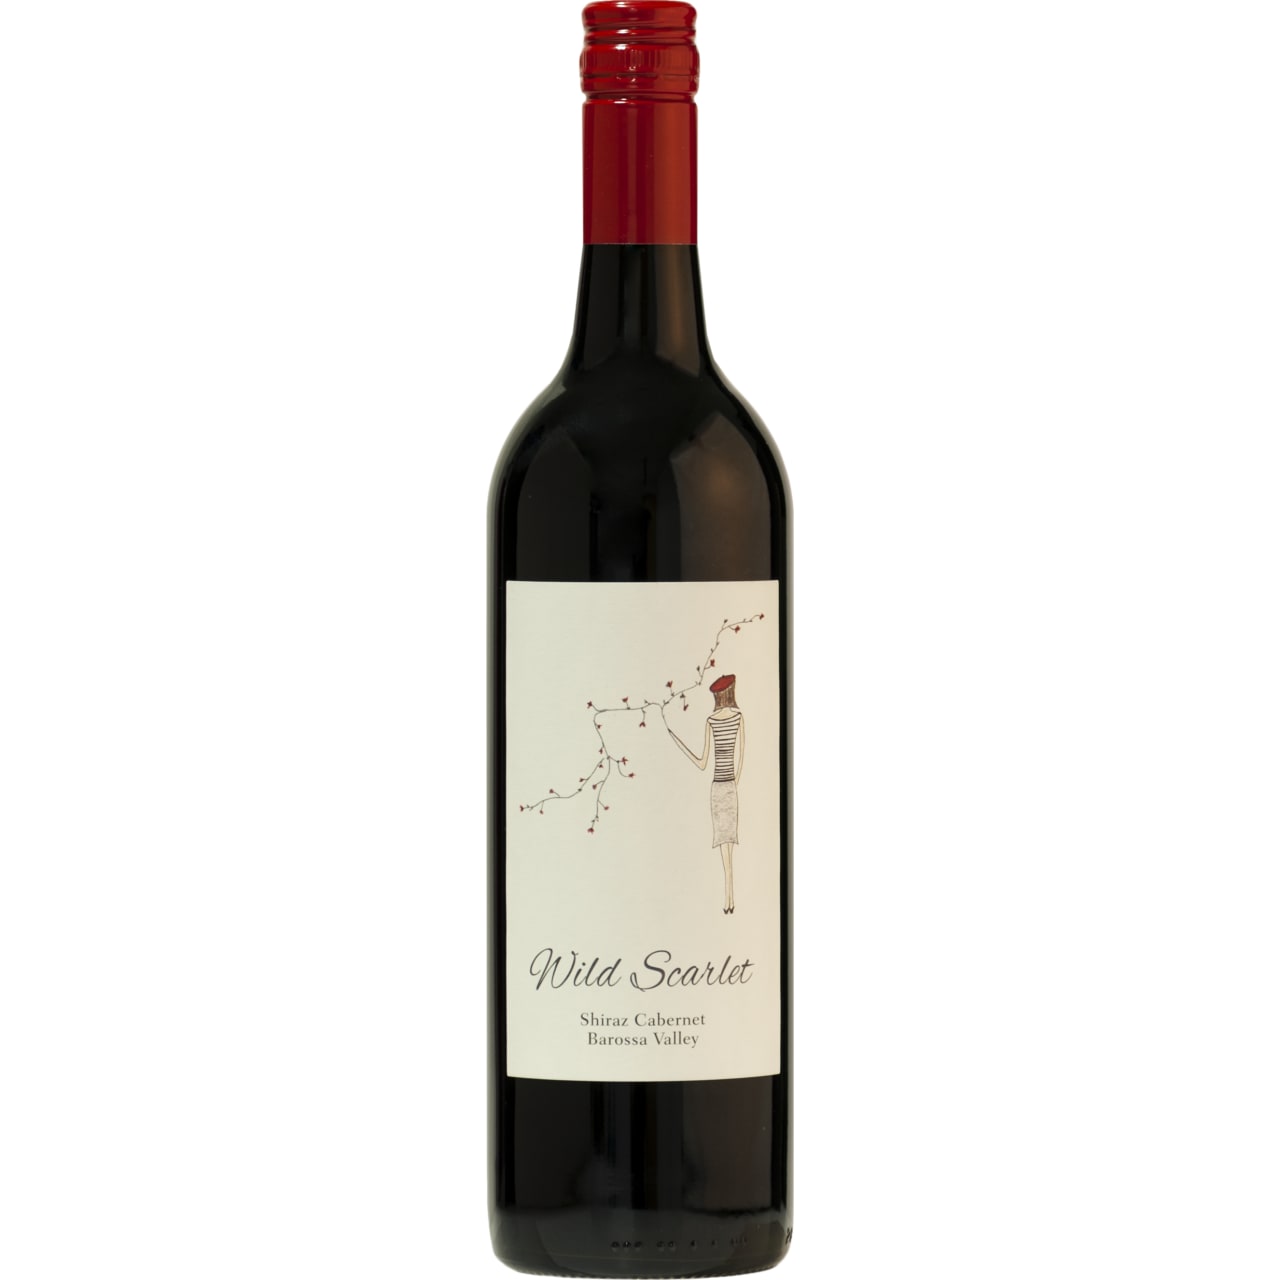 This classic Australian blend of Shiraz and Cabernet shows vibrant varietal characteristics; richness from the shiraz and dark cocoa notes of the cabernet sauvignon.